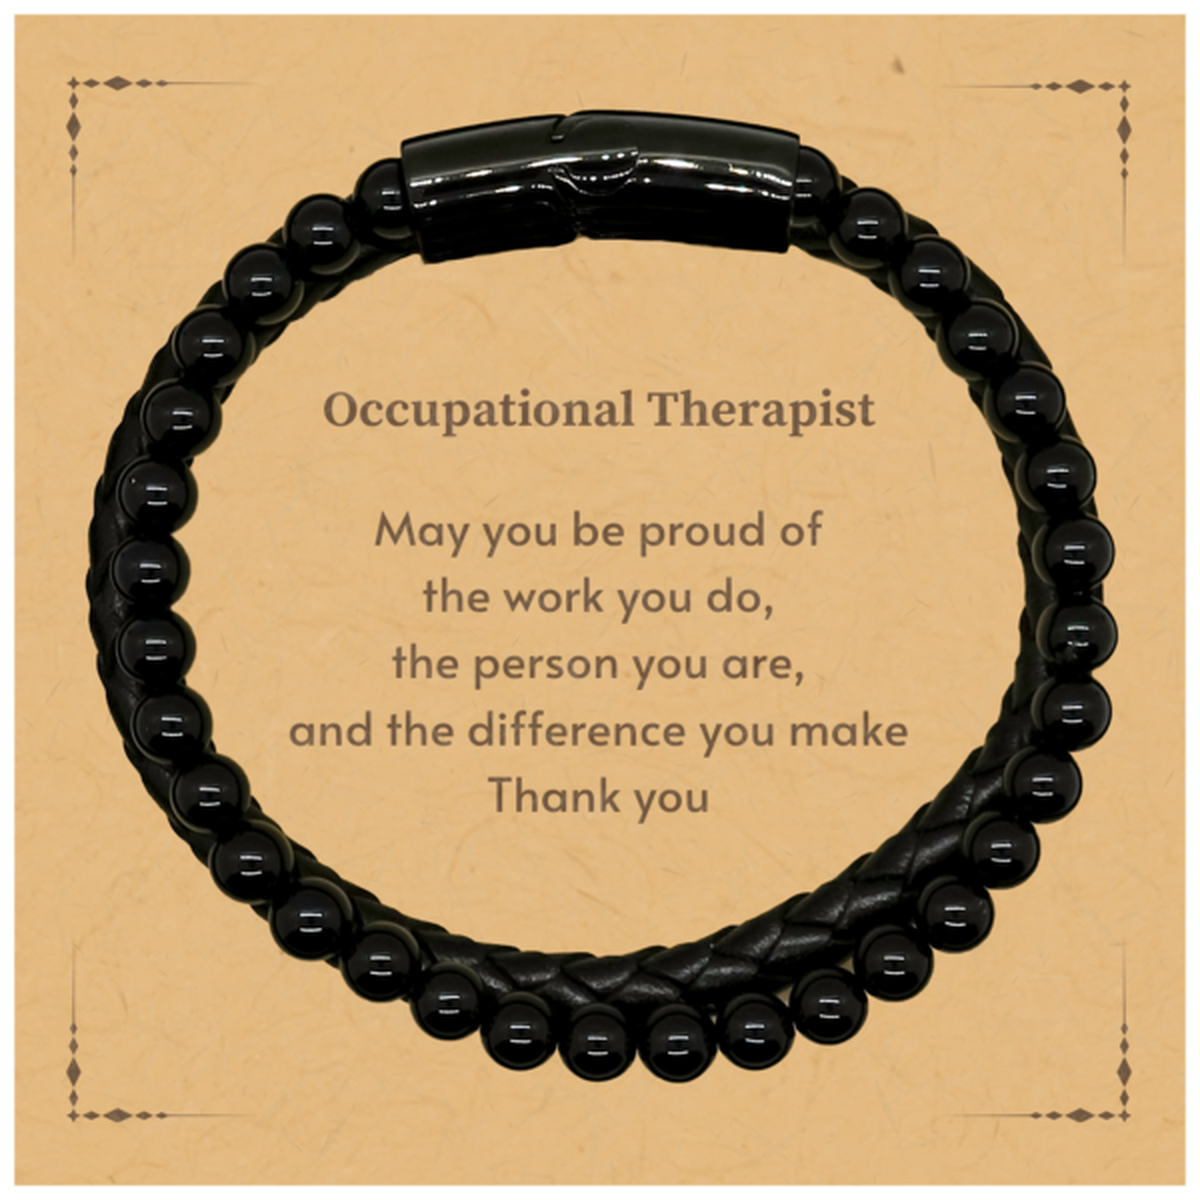 Heartwarming Stone Leather Bracelets Retirement Coworkers Gifts for Occupational Therapist, Occupational Therapist May You be proud of the work you do, the person you are Gifts for Boss Men Women Friends